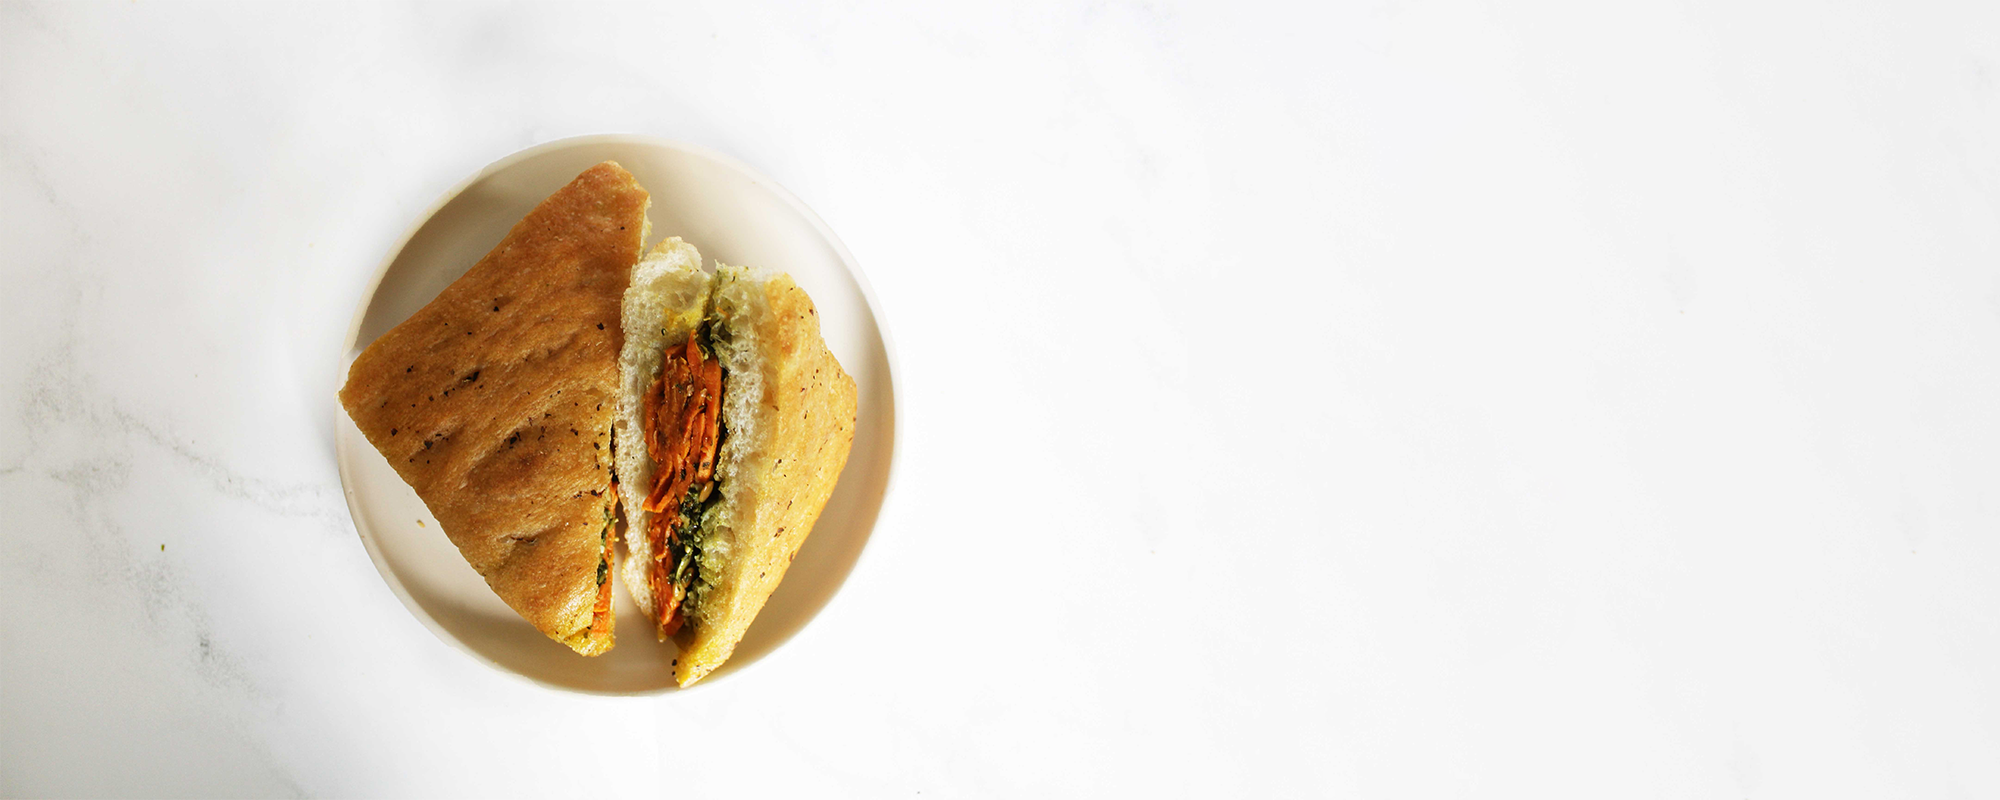 vegetarian panino sandwich with sweet potato and basil pesto. Served with pumpkin seeds on focaccia bread.